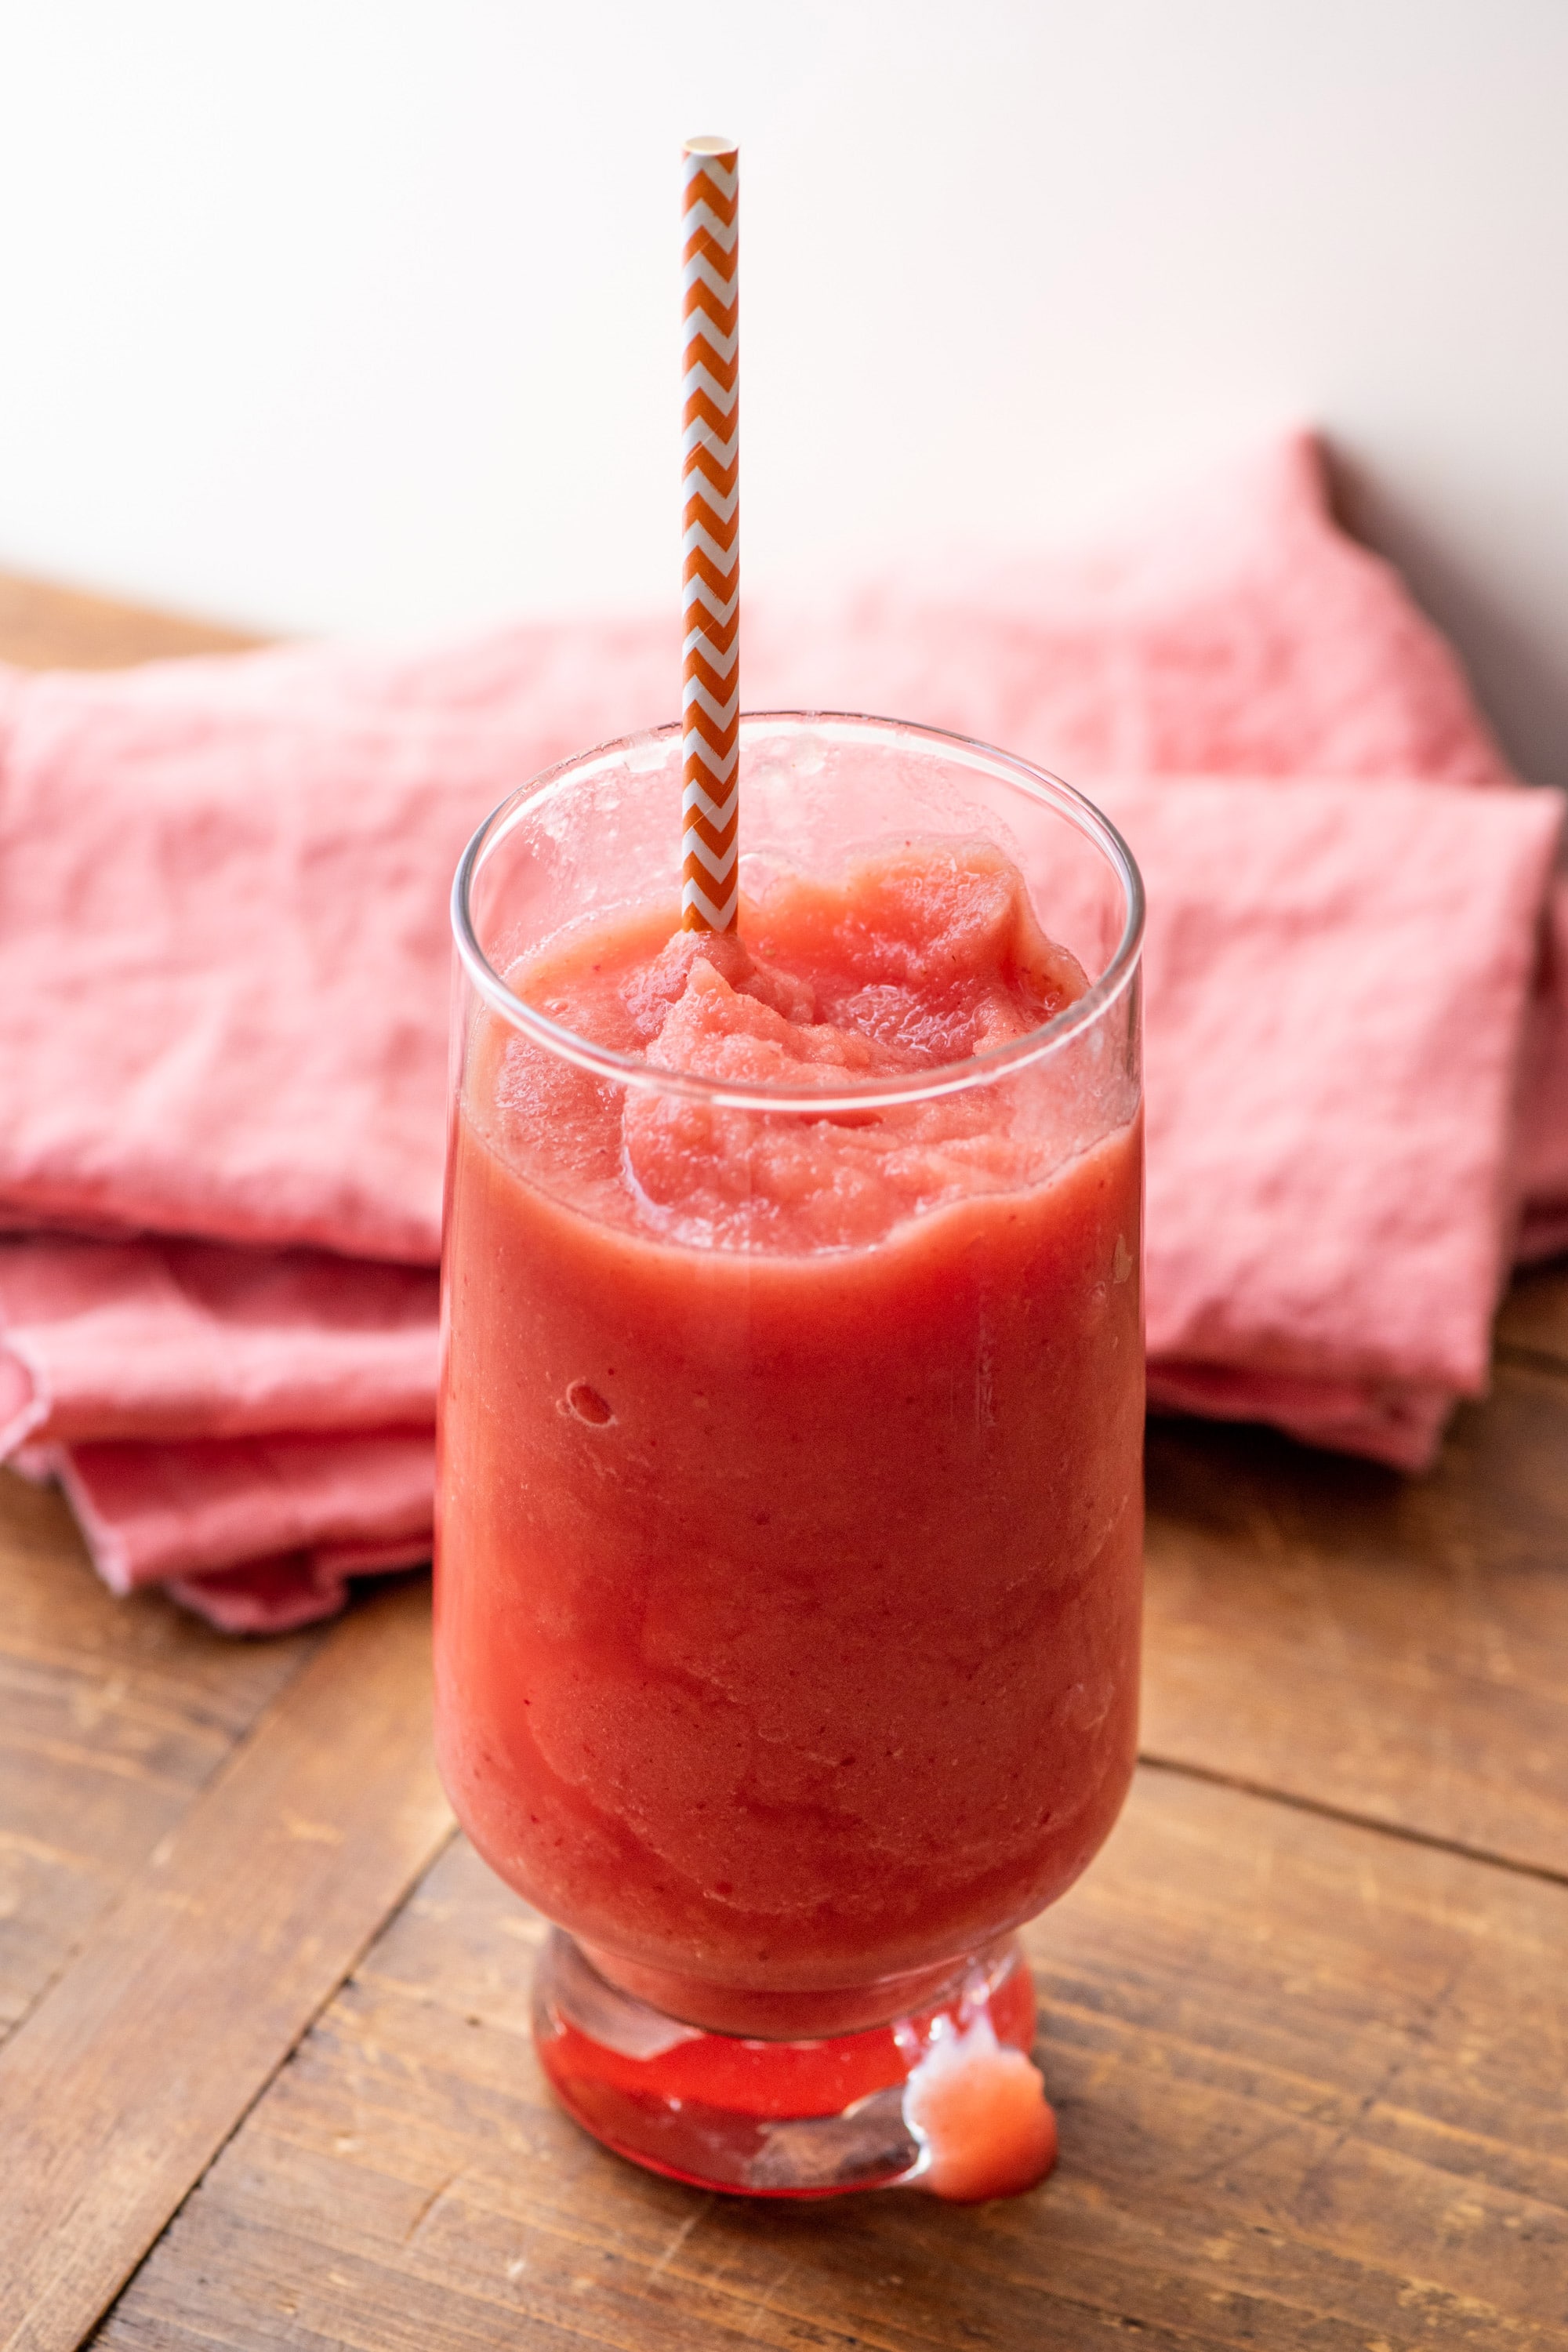 Colorful straw in a tall glass of Watermelon Strawberry Smoothie.